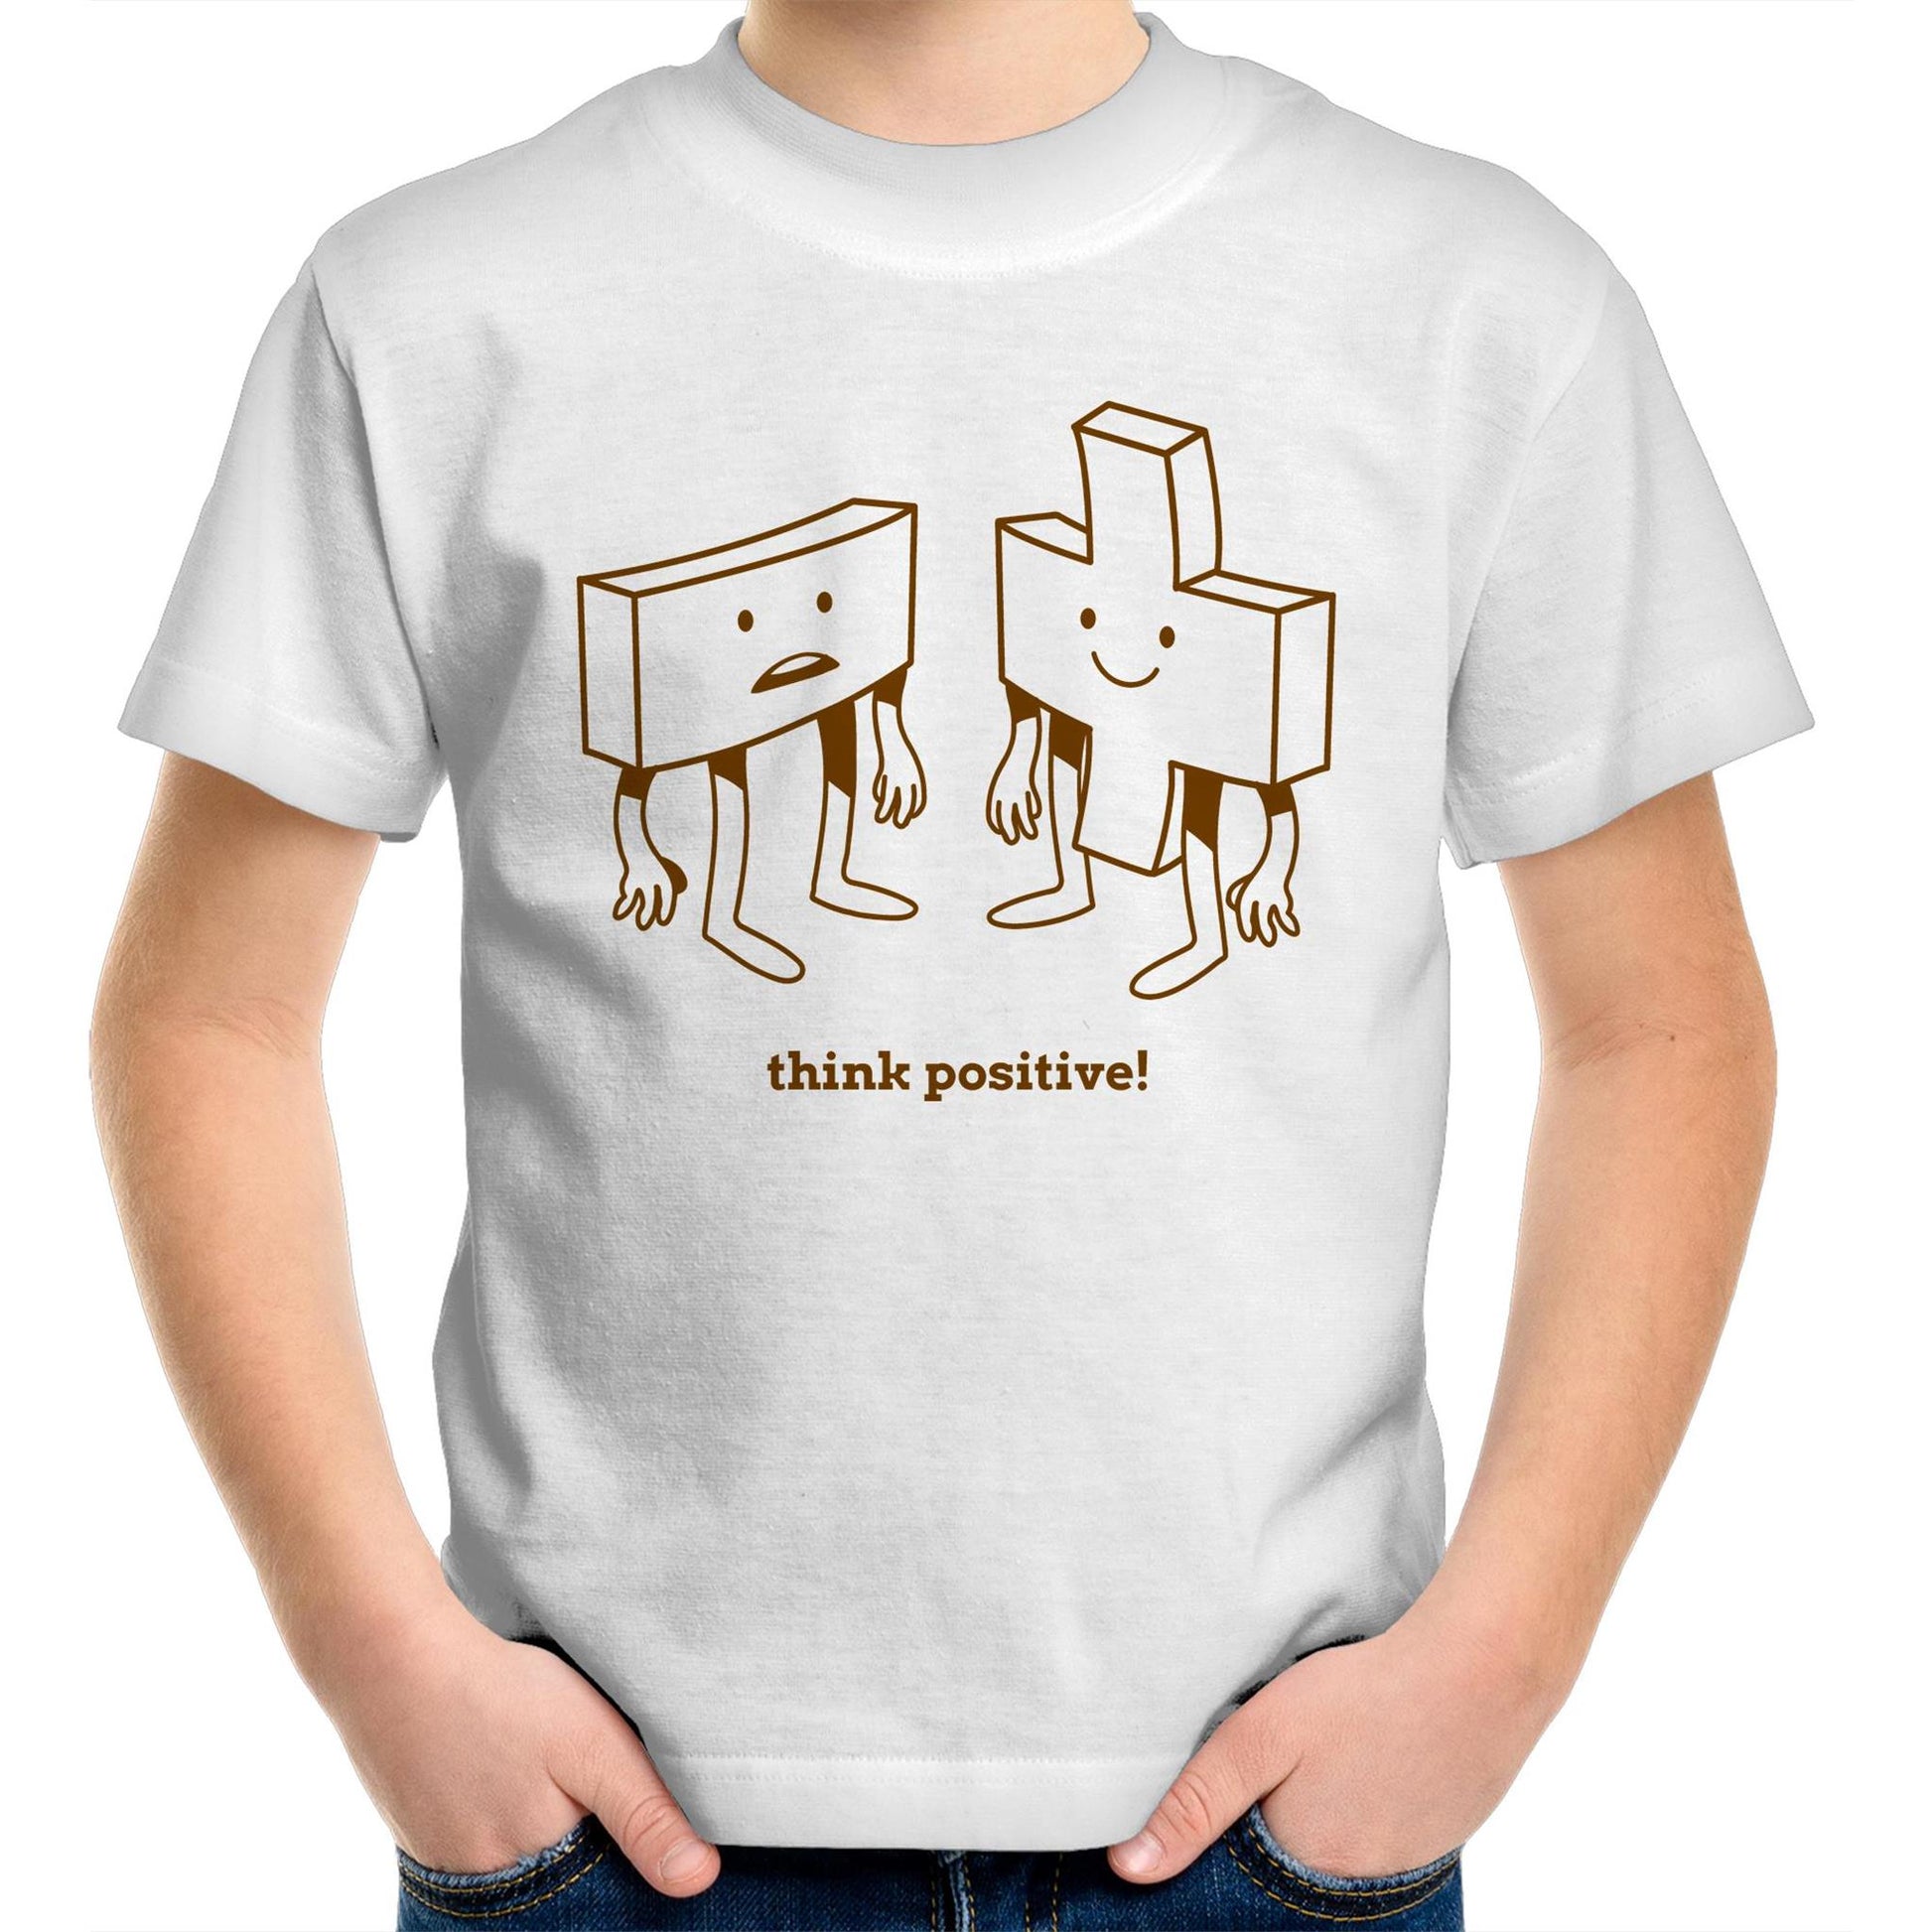 Think Positive, Plus And Minus - Kids Youth T-Shirt White Kids Youth T-shirt Maths Motivation